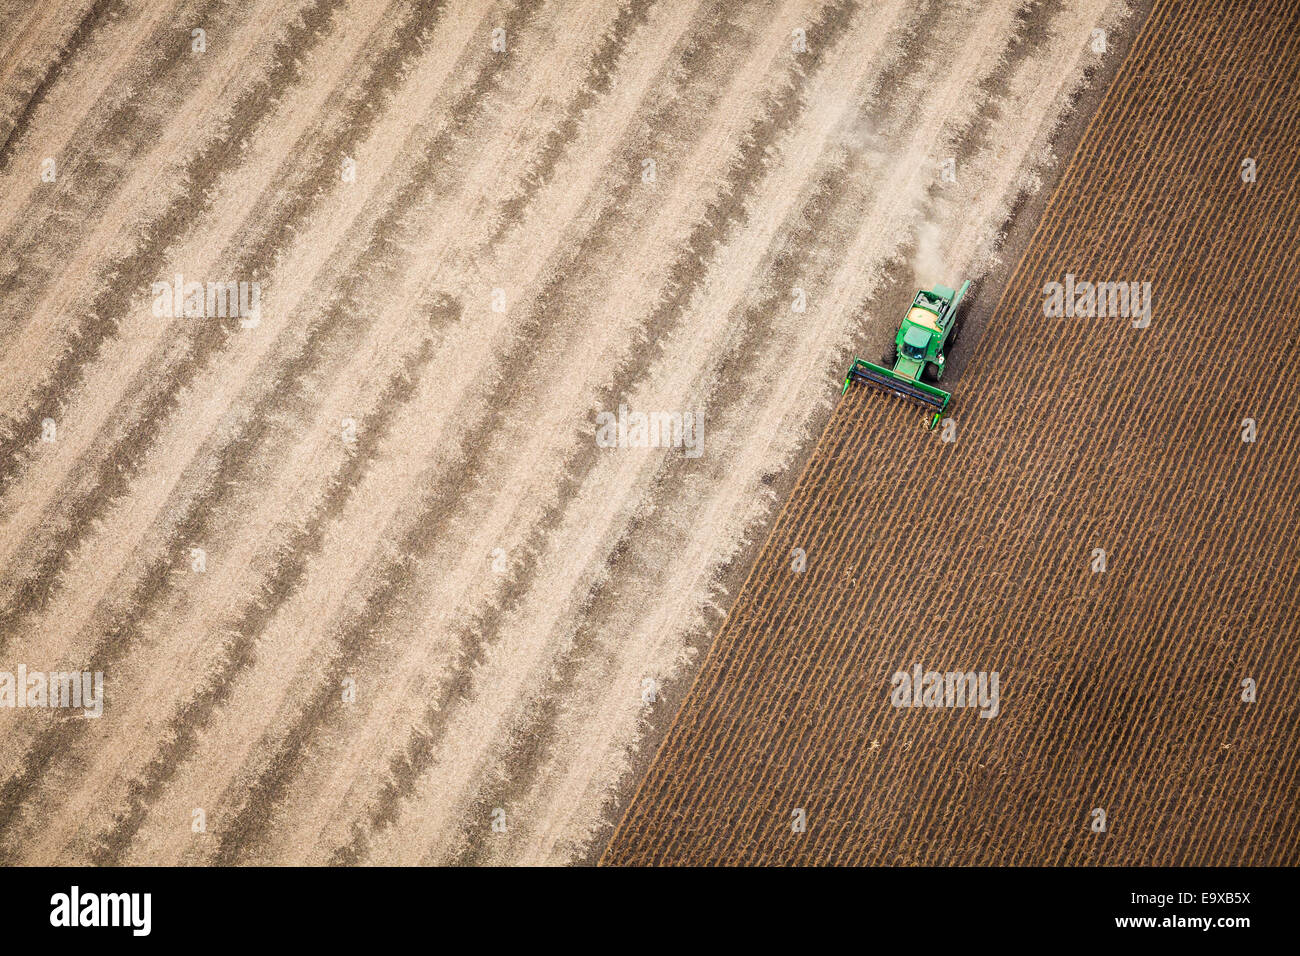 Aerial photo of crop being harvested. Stock Photo